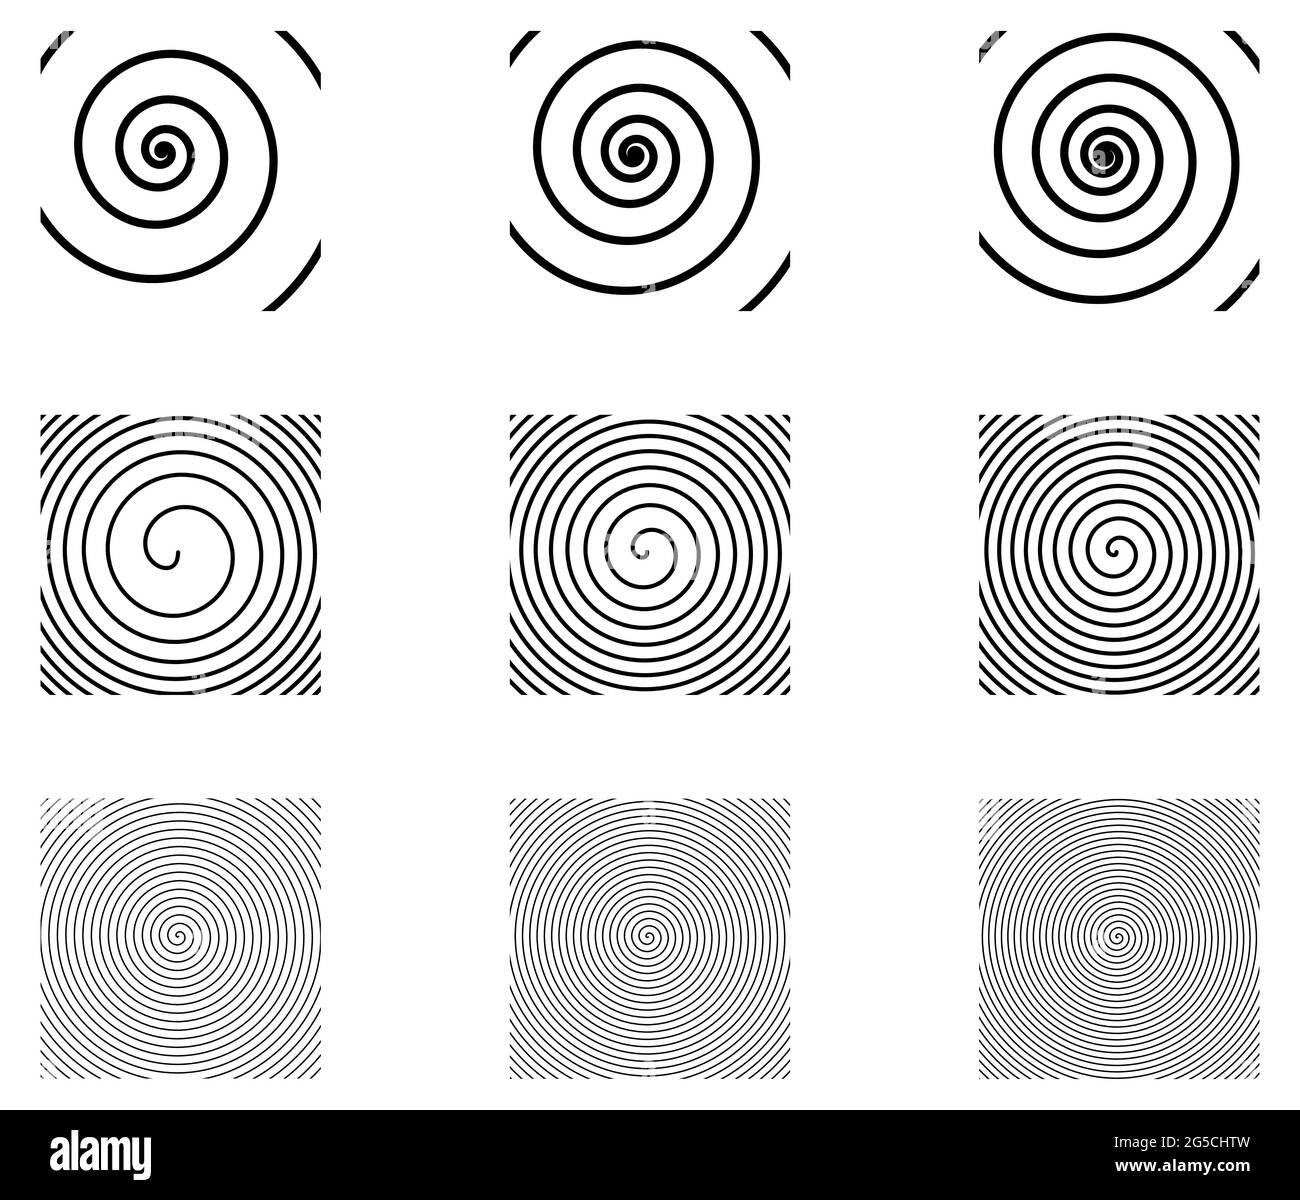 Simple spiral drawing forming square Stock Vector